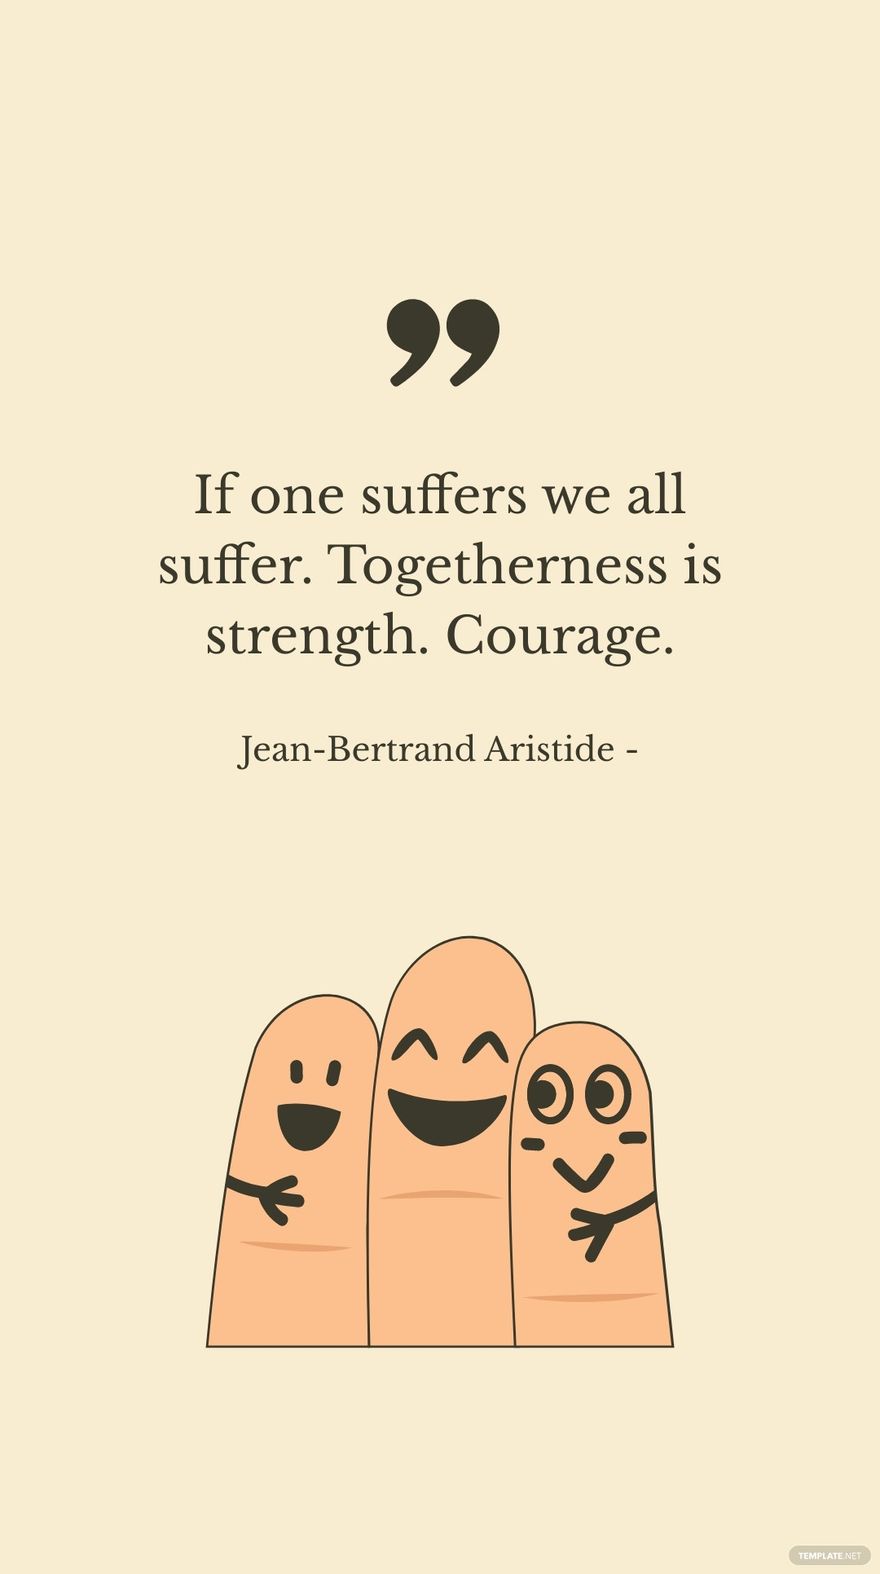 Jean-Bertrand Aristide - If one suffers we all suffer. Togetherness is strength. Courage.